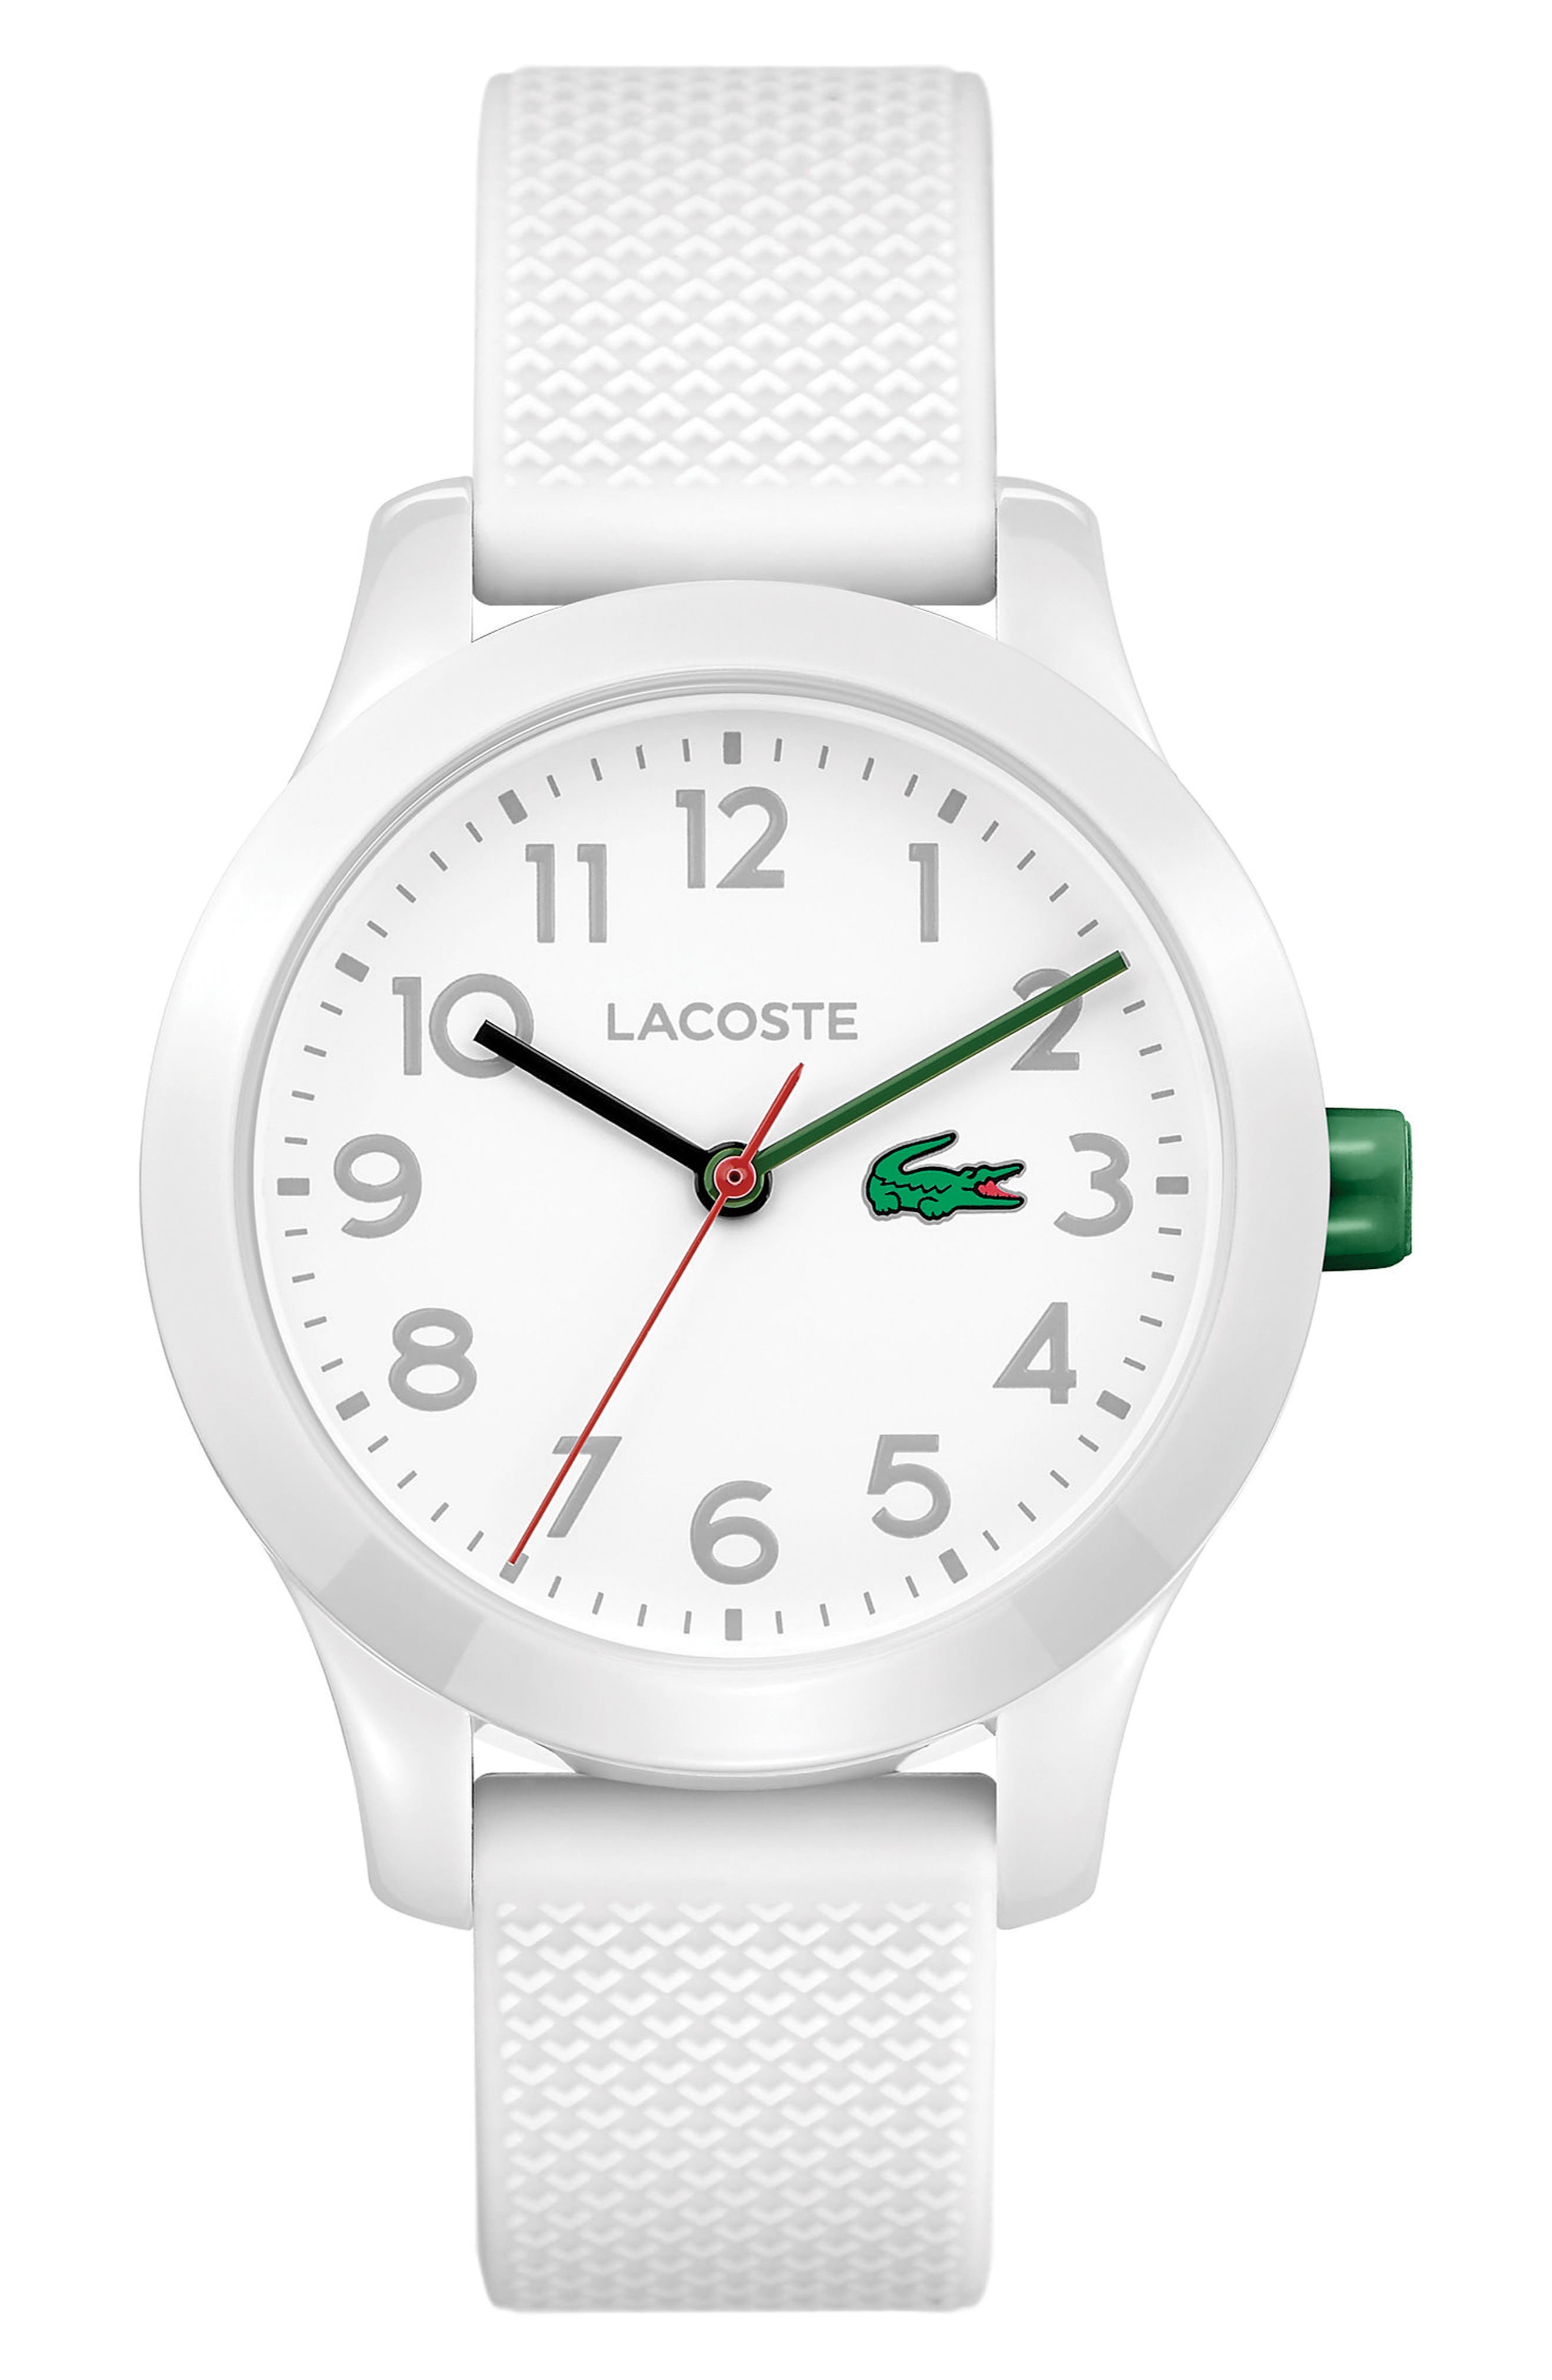 Women's Lacoste Watches | Nordstrom